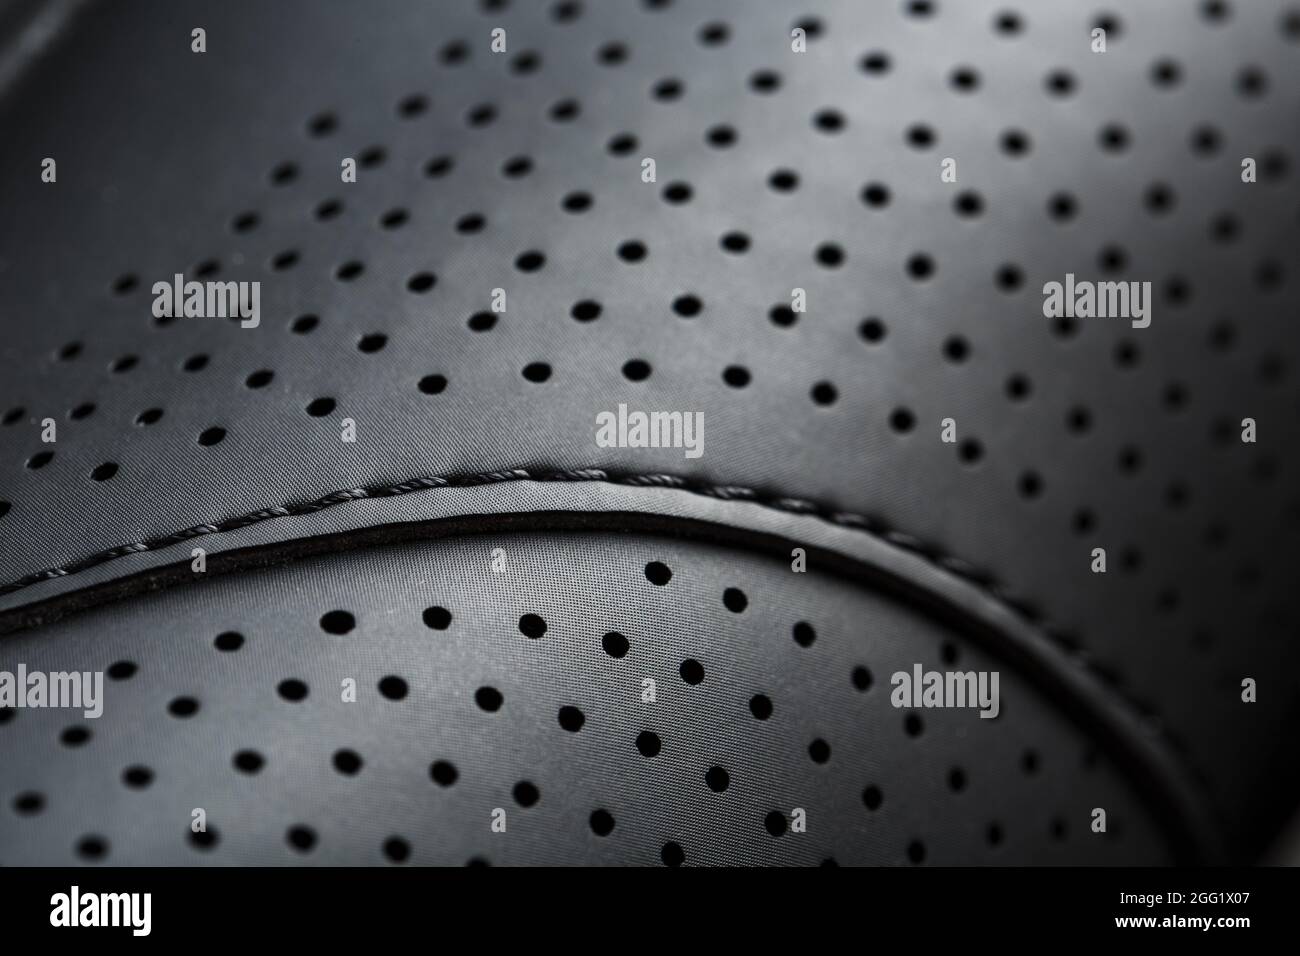 Perforated material made of black imitation leather in full screen. Close-up Stock Photo